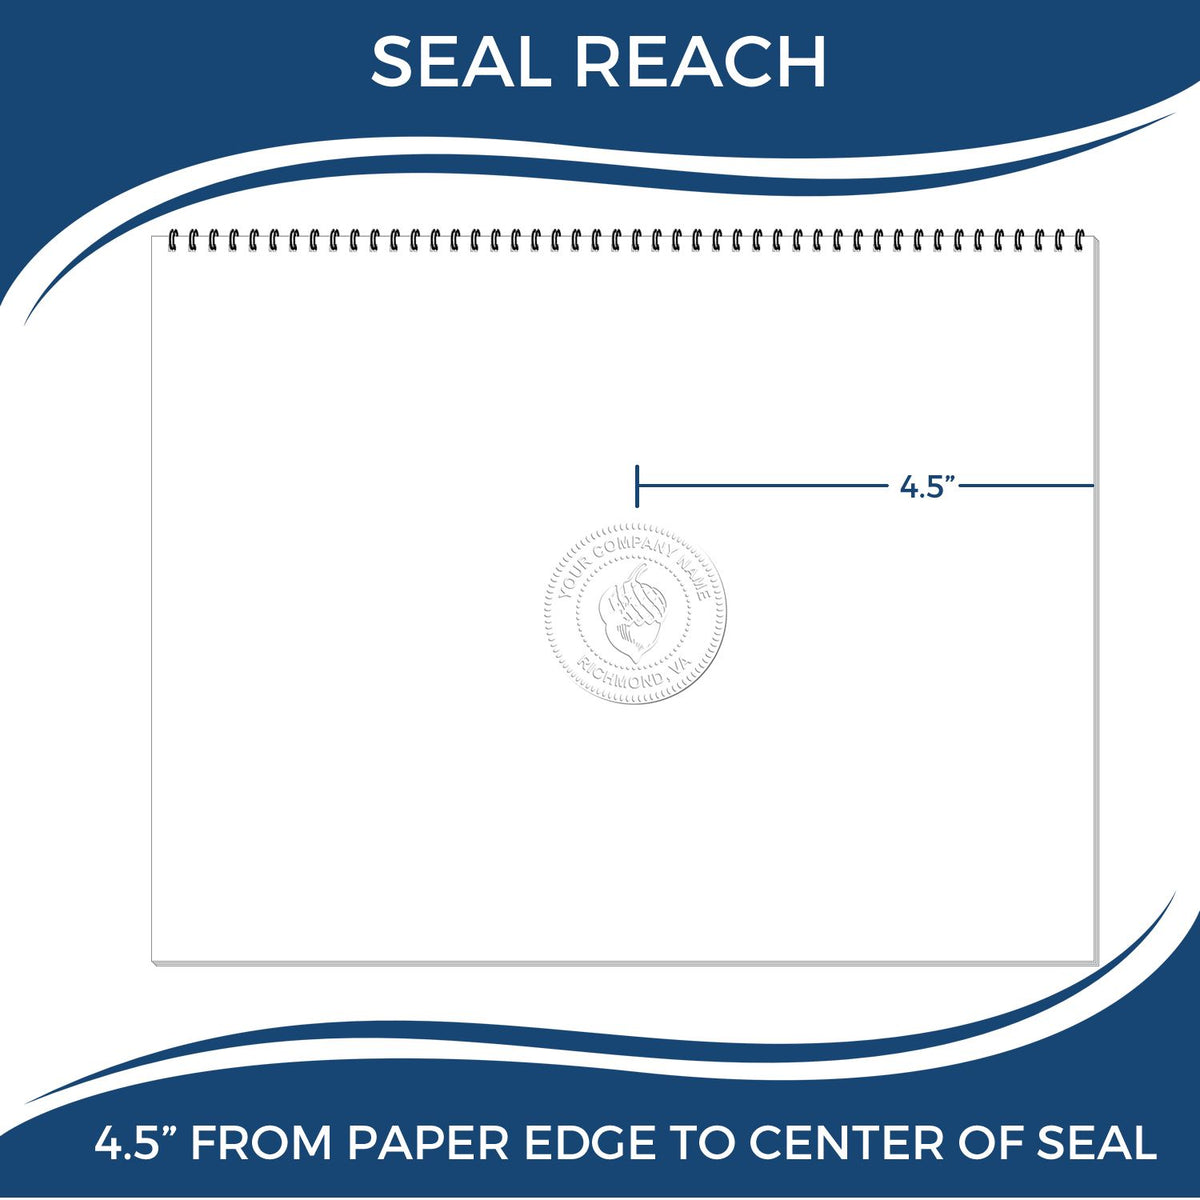 An infographic showing the seal reach which is represented by a ruler and a miniature seal image of the State of South Dakota Extended Long Reach Engineer Seal